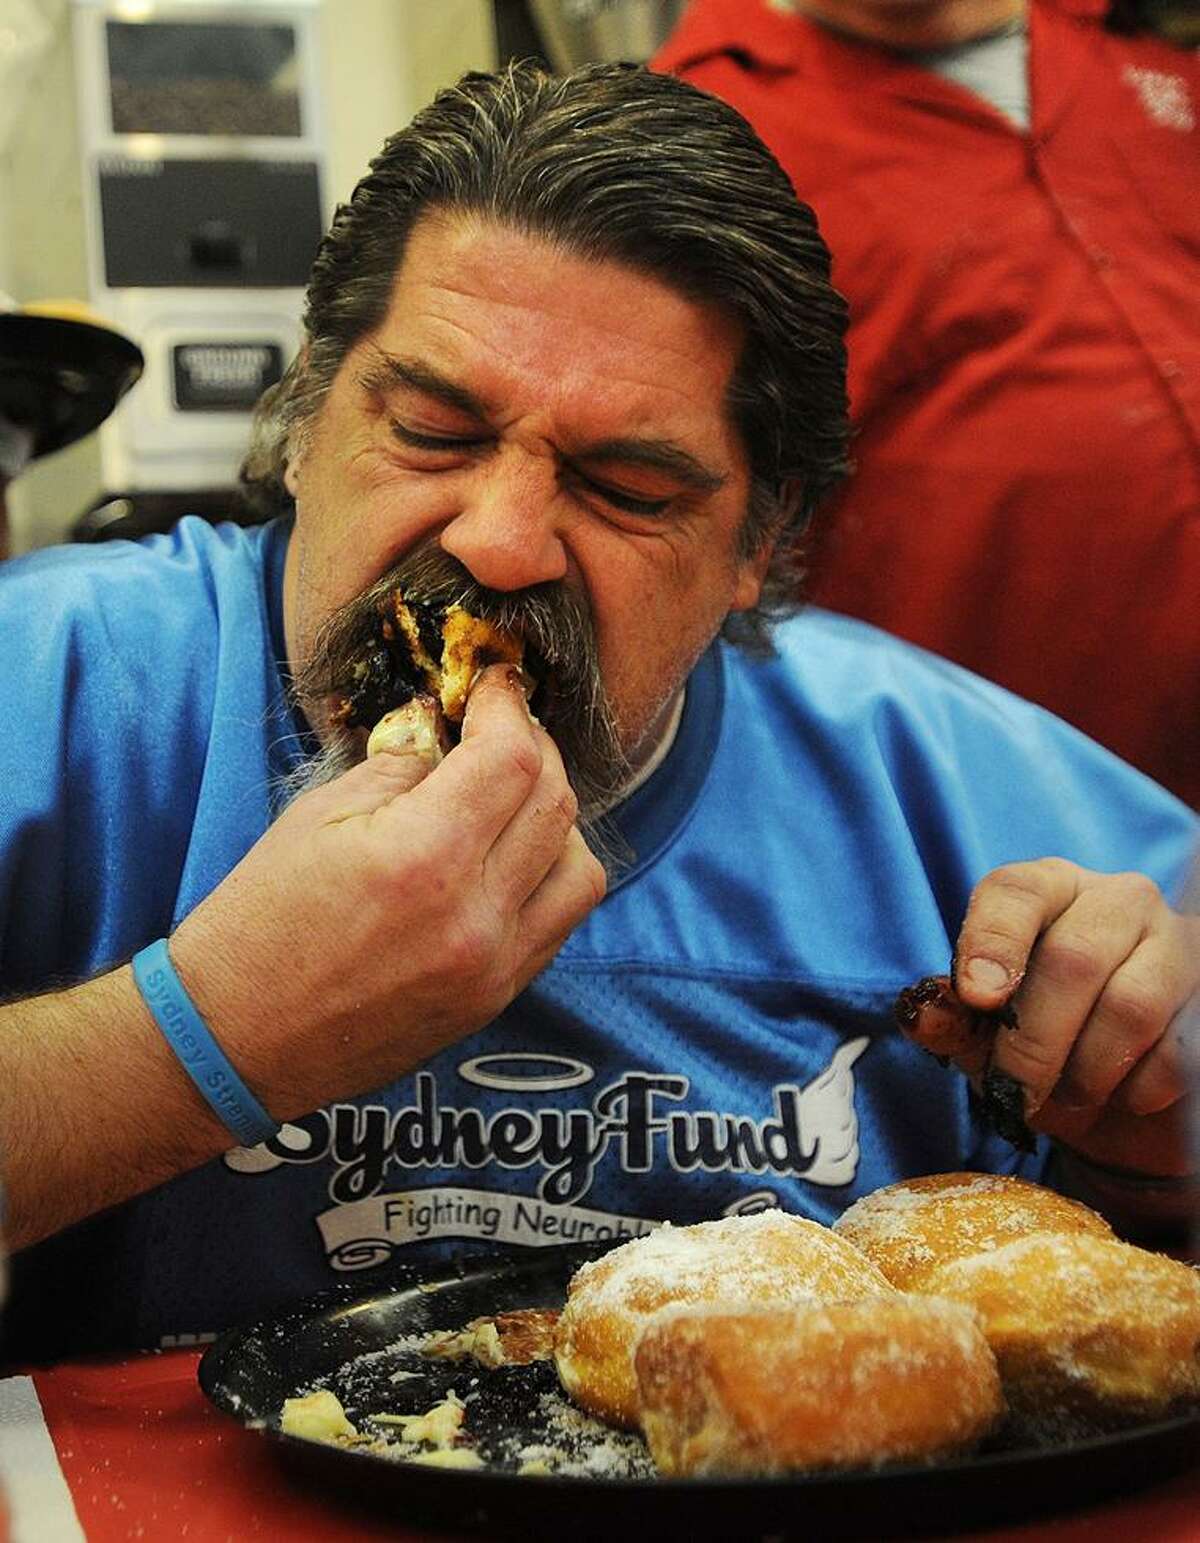 Marcus Bartone, of Derby, digs in to a plate of paczkis, or Polish filled doughnuts, during the 19th annual Paczki Eating Contest at Eddy’s Bake Shop in Ansonia in February.